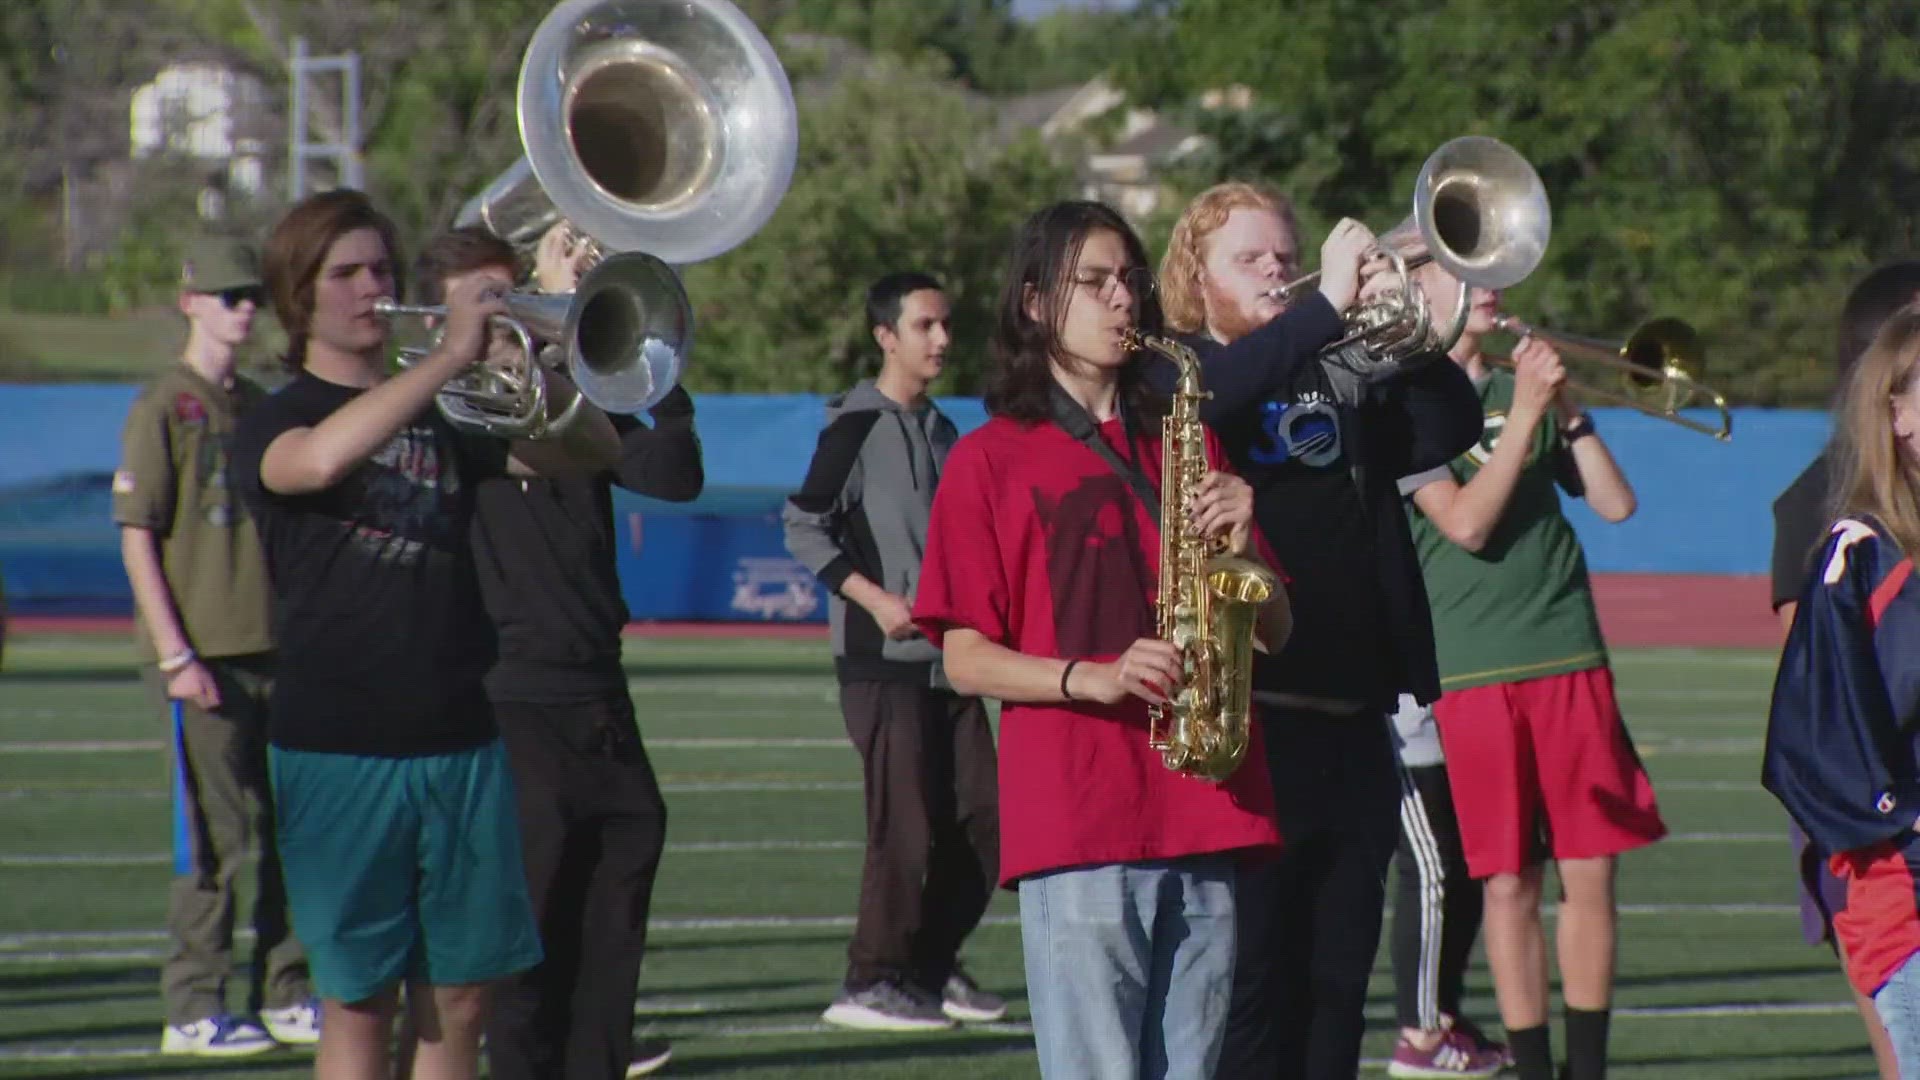 Community members— from college professors to professional musicians— are helping Broomfield High School's marching band with their sound.